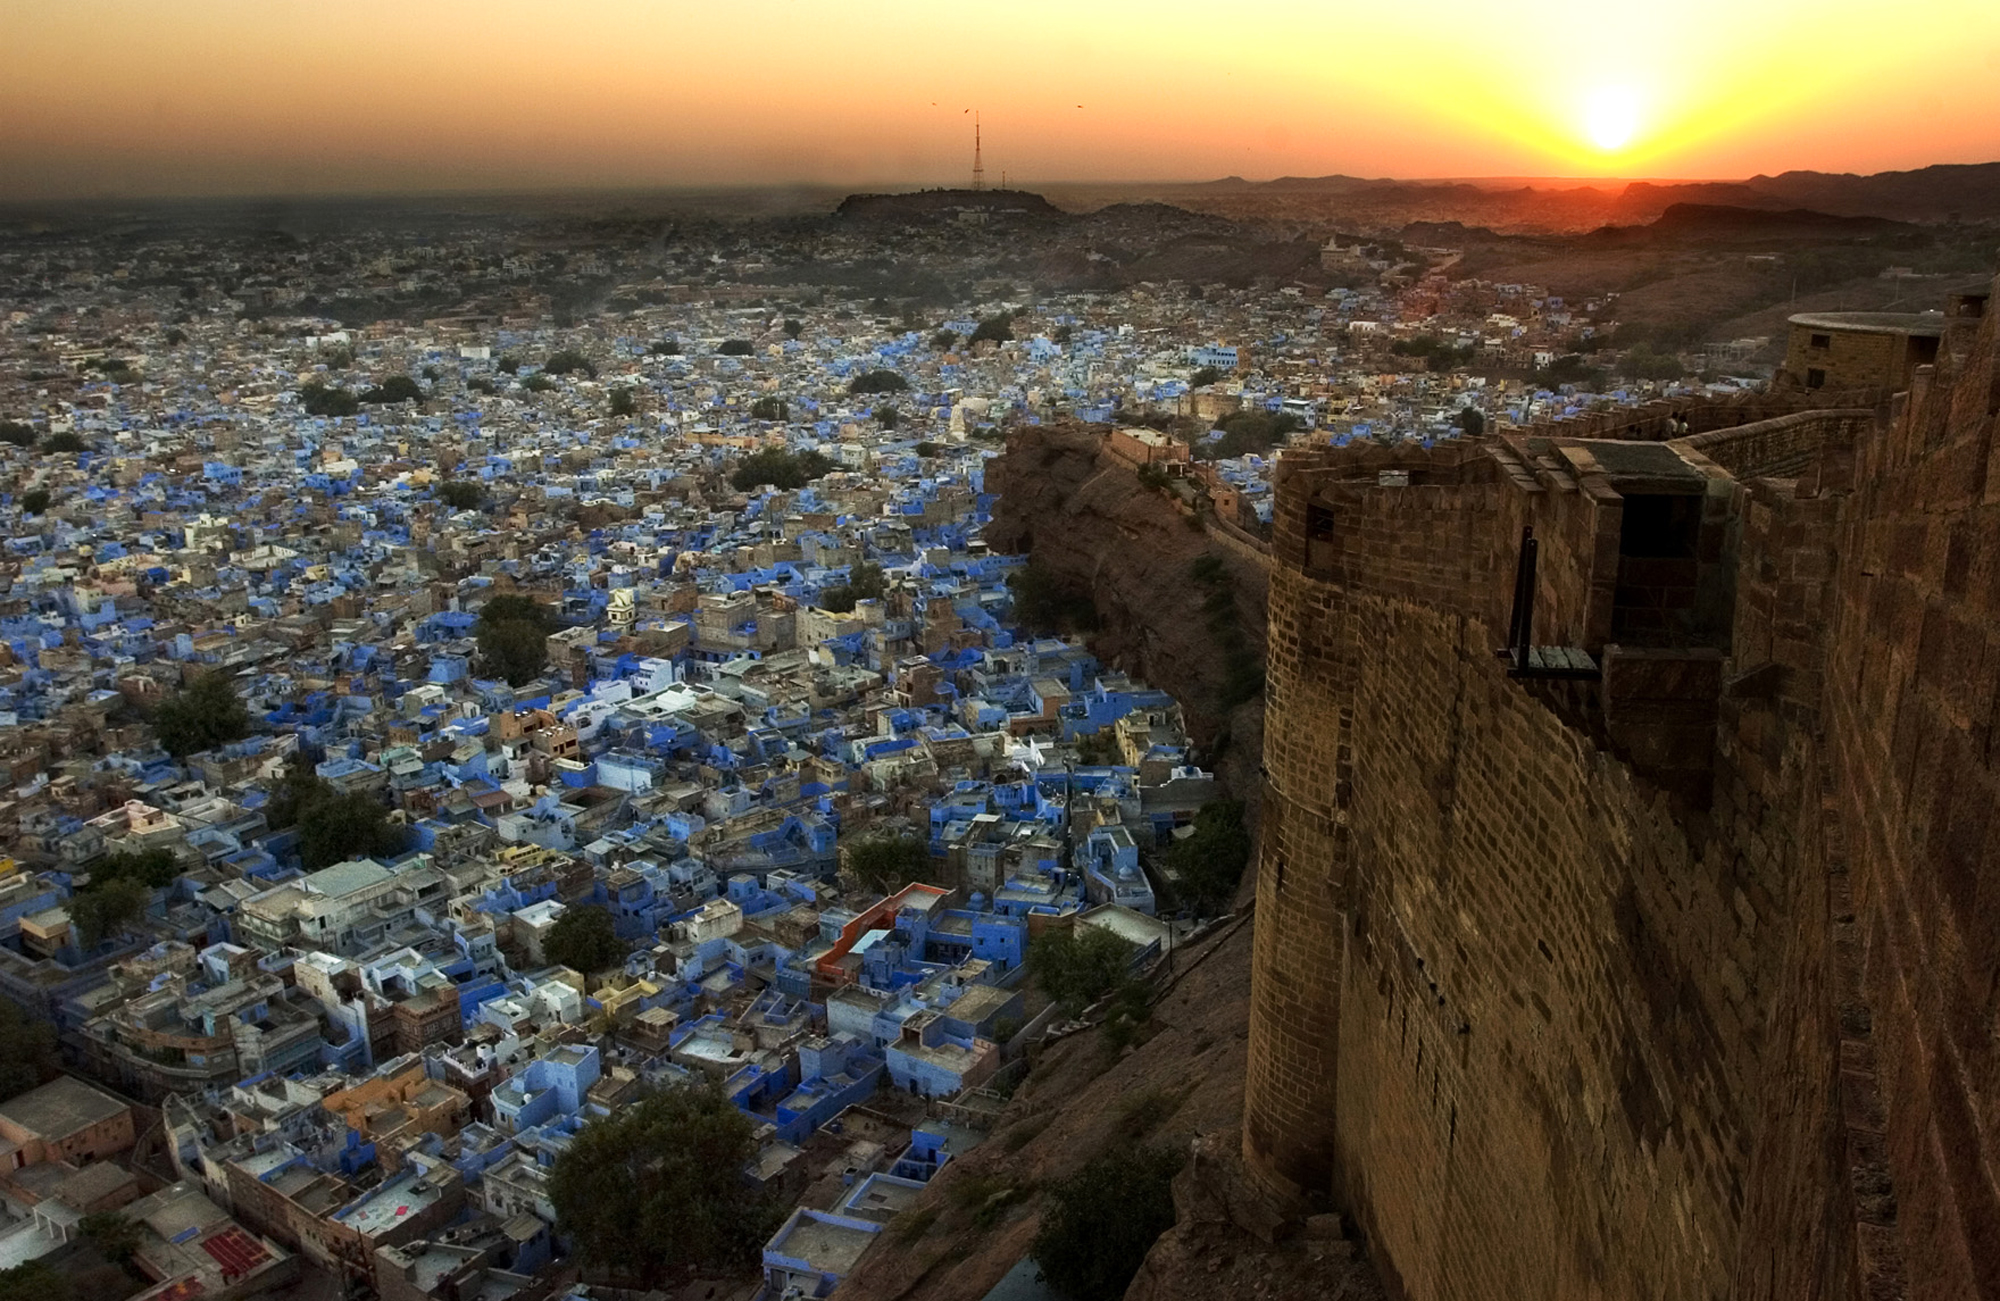 At the foothill of Mehrangarh Fort at Jodhpur in Rajasthan, India, the most majestic and one of the largest forts in India, there is a 500 years old settlement called Brahmapuri with most of the houses painted blue.